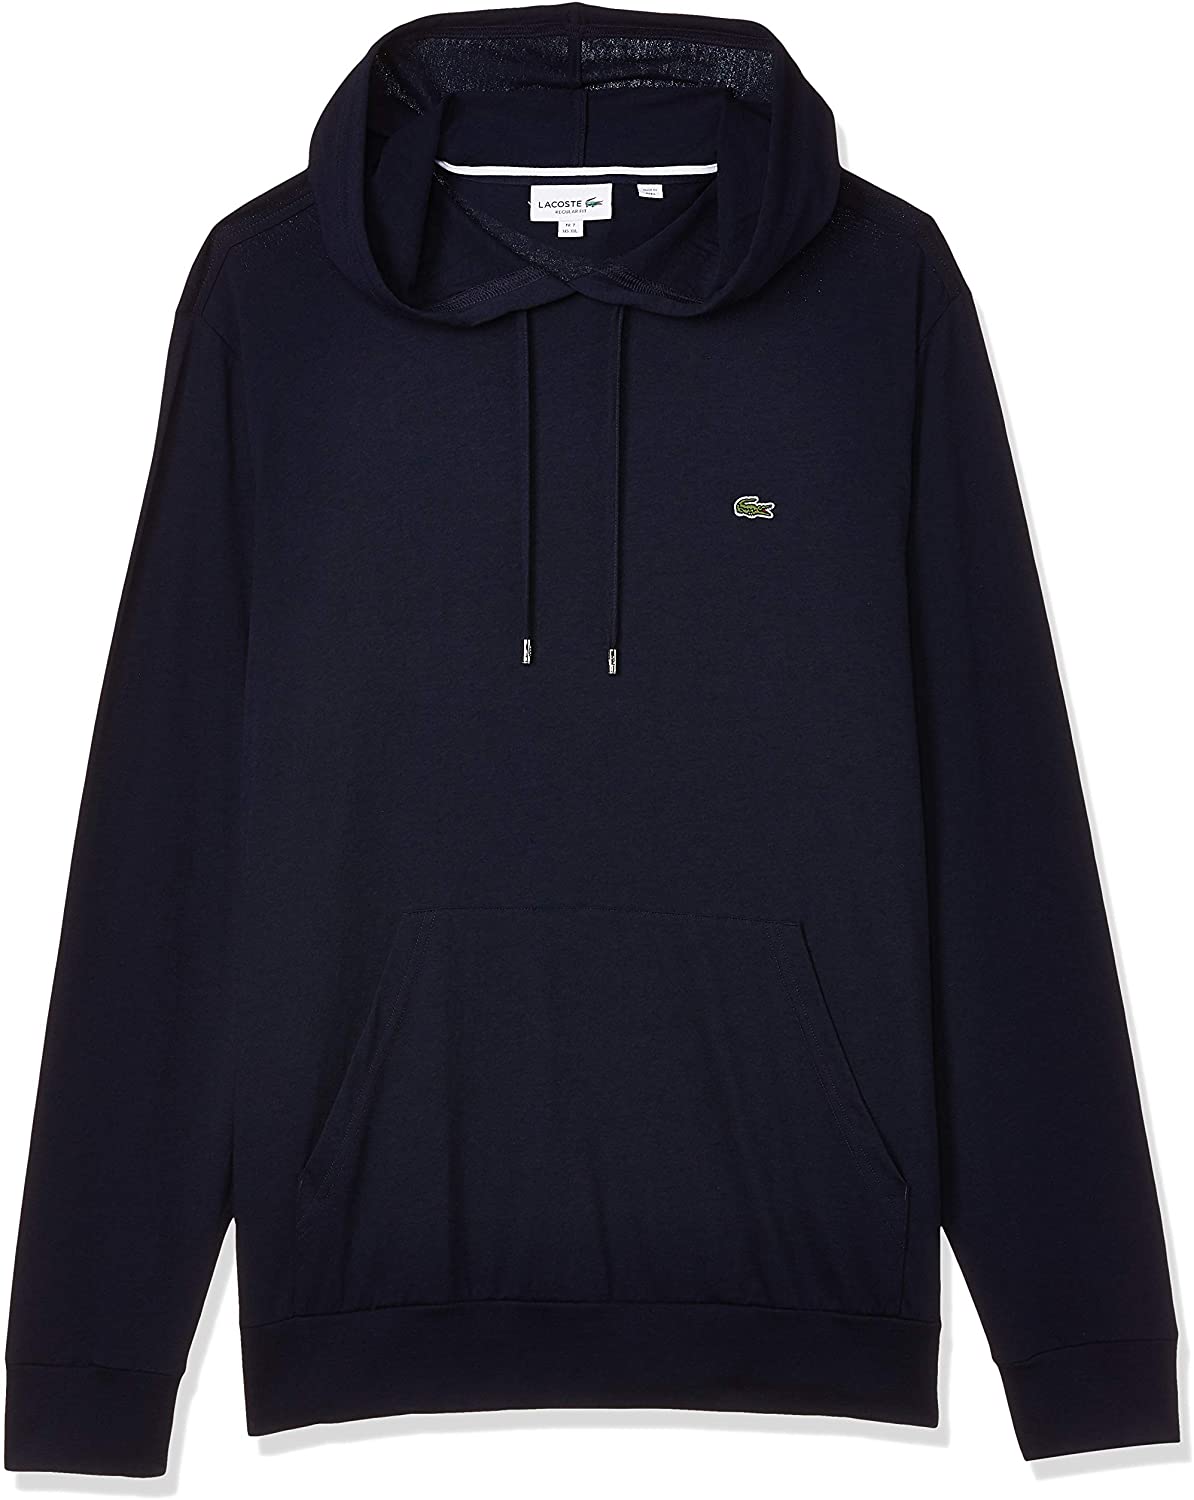 Lacoste Mens Long Sleeve Hooded Jersey Cotton T-Shirt Hoodie | eBay